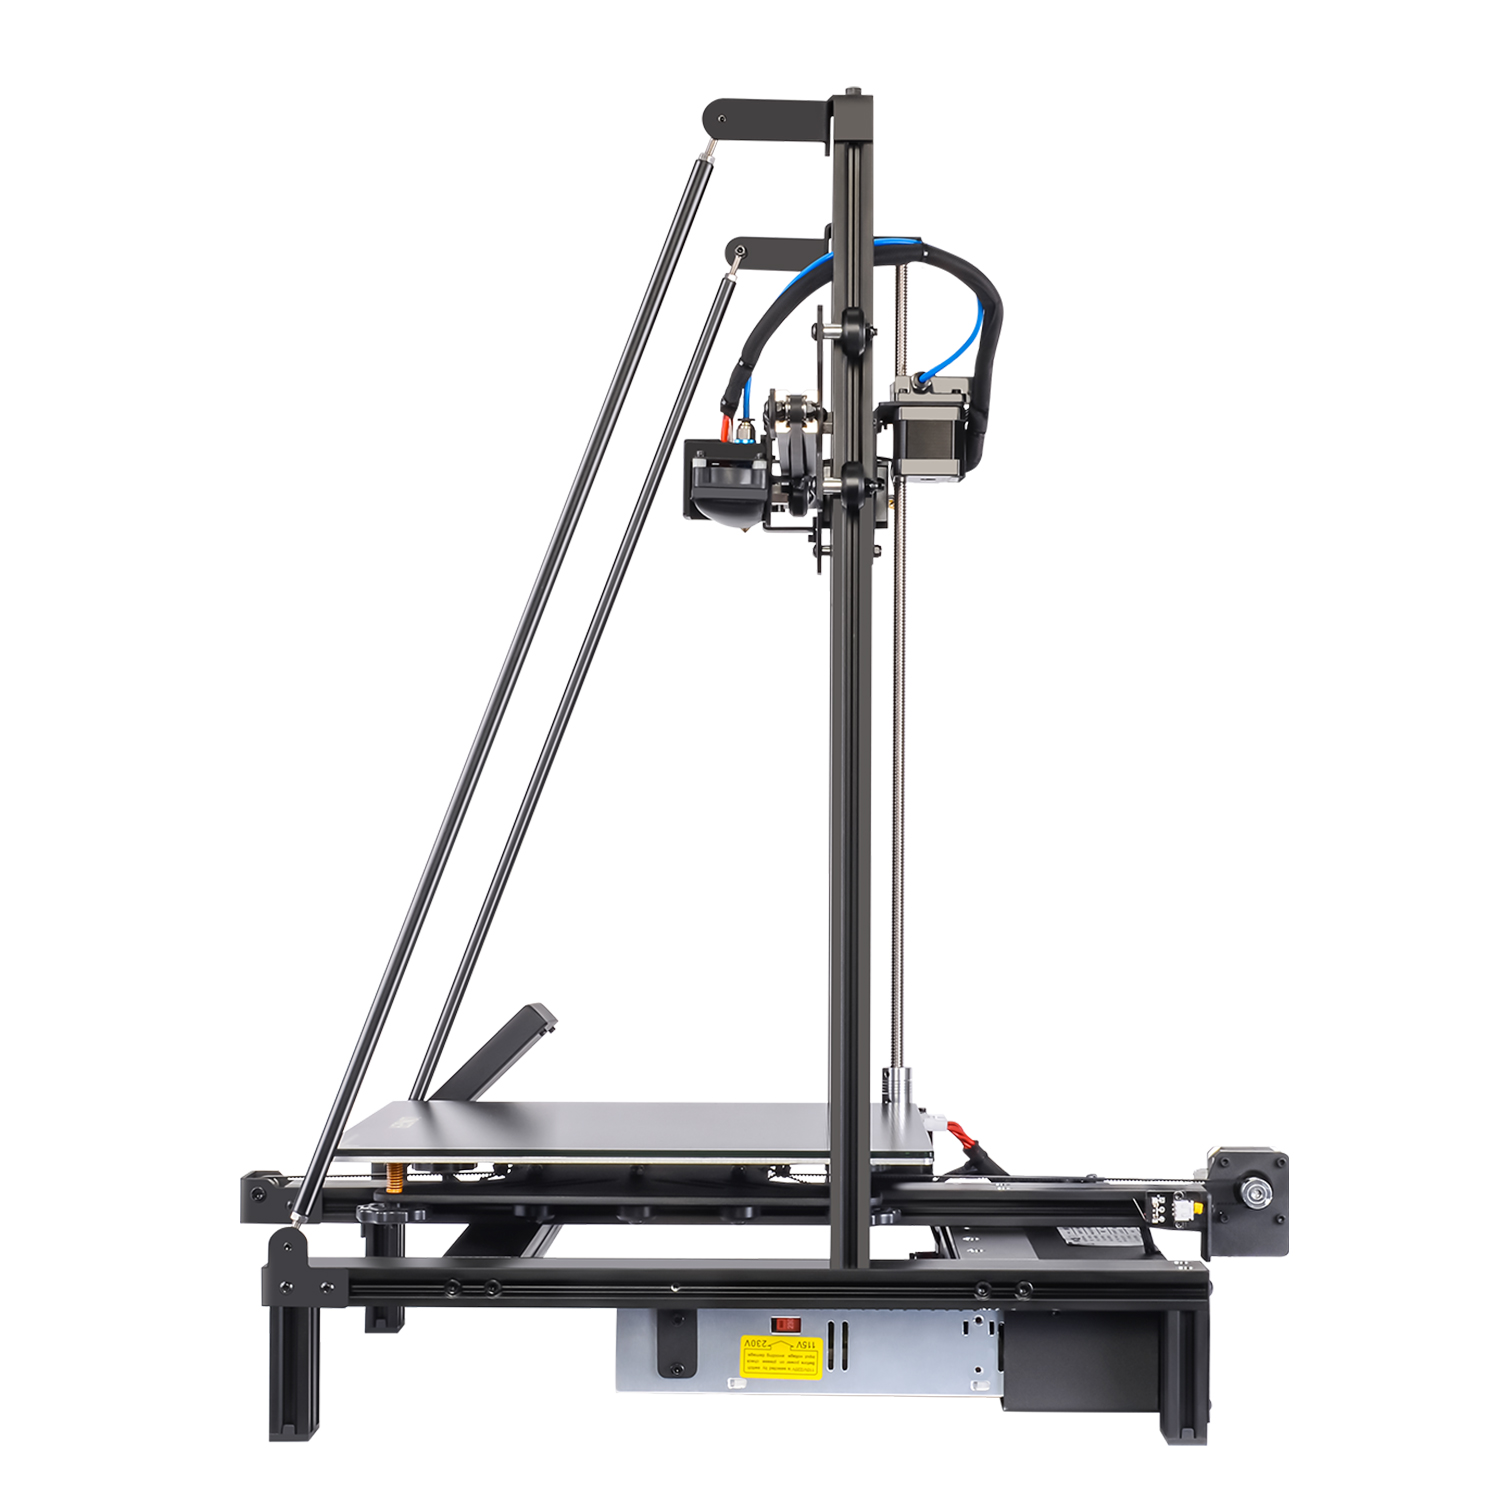 Find EU Direce LONGER LK5 Pro 3D Printer Kit 300x300x400mm Print Size for Sale on Gipsybee.com with cryptocurrencies